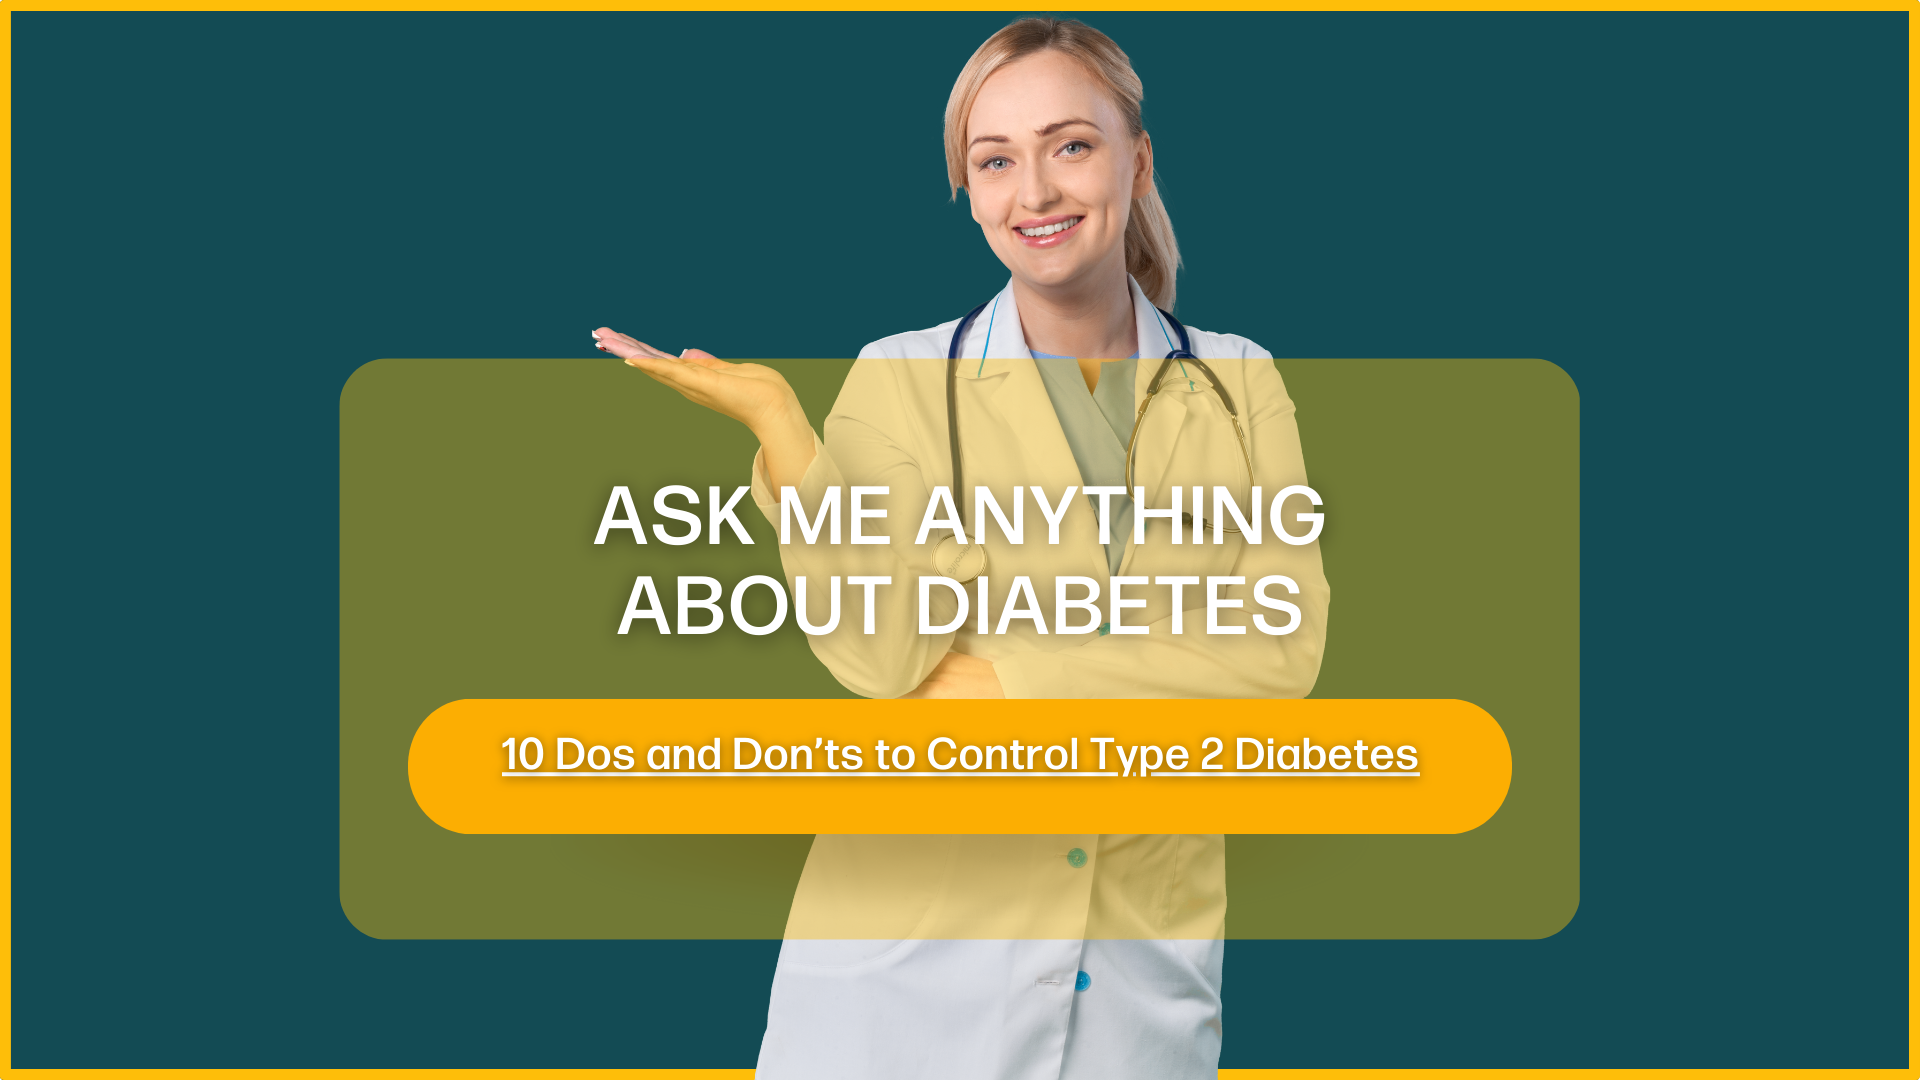 10 Dos and Don’ts to Control Type 2 Diabetes